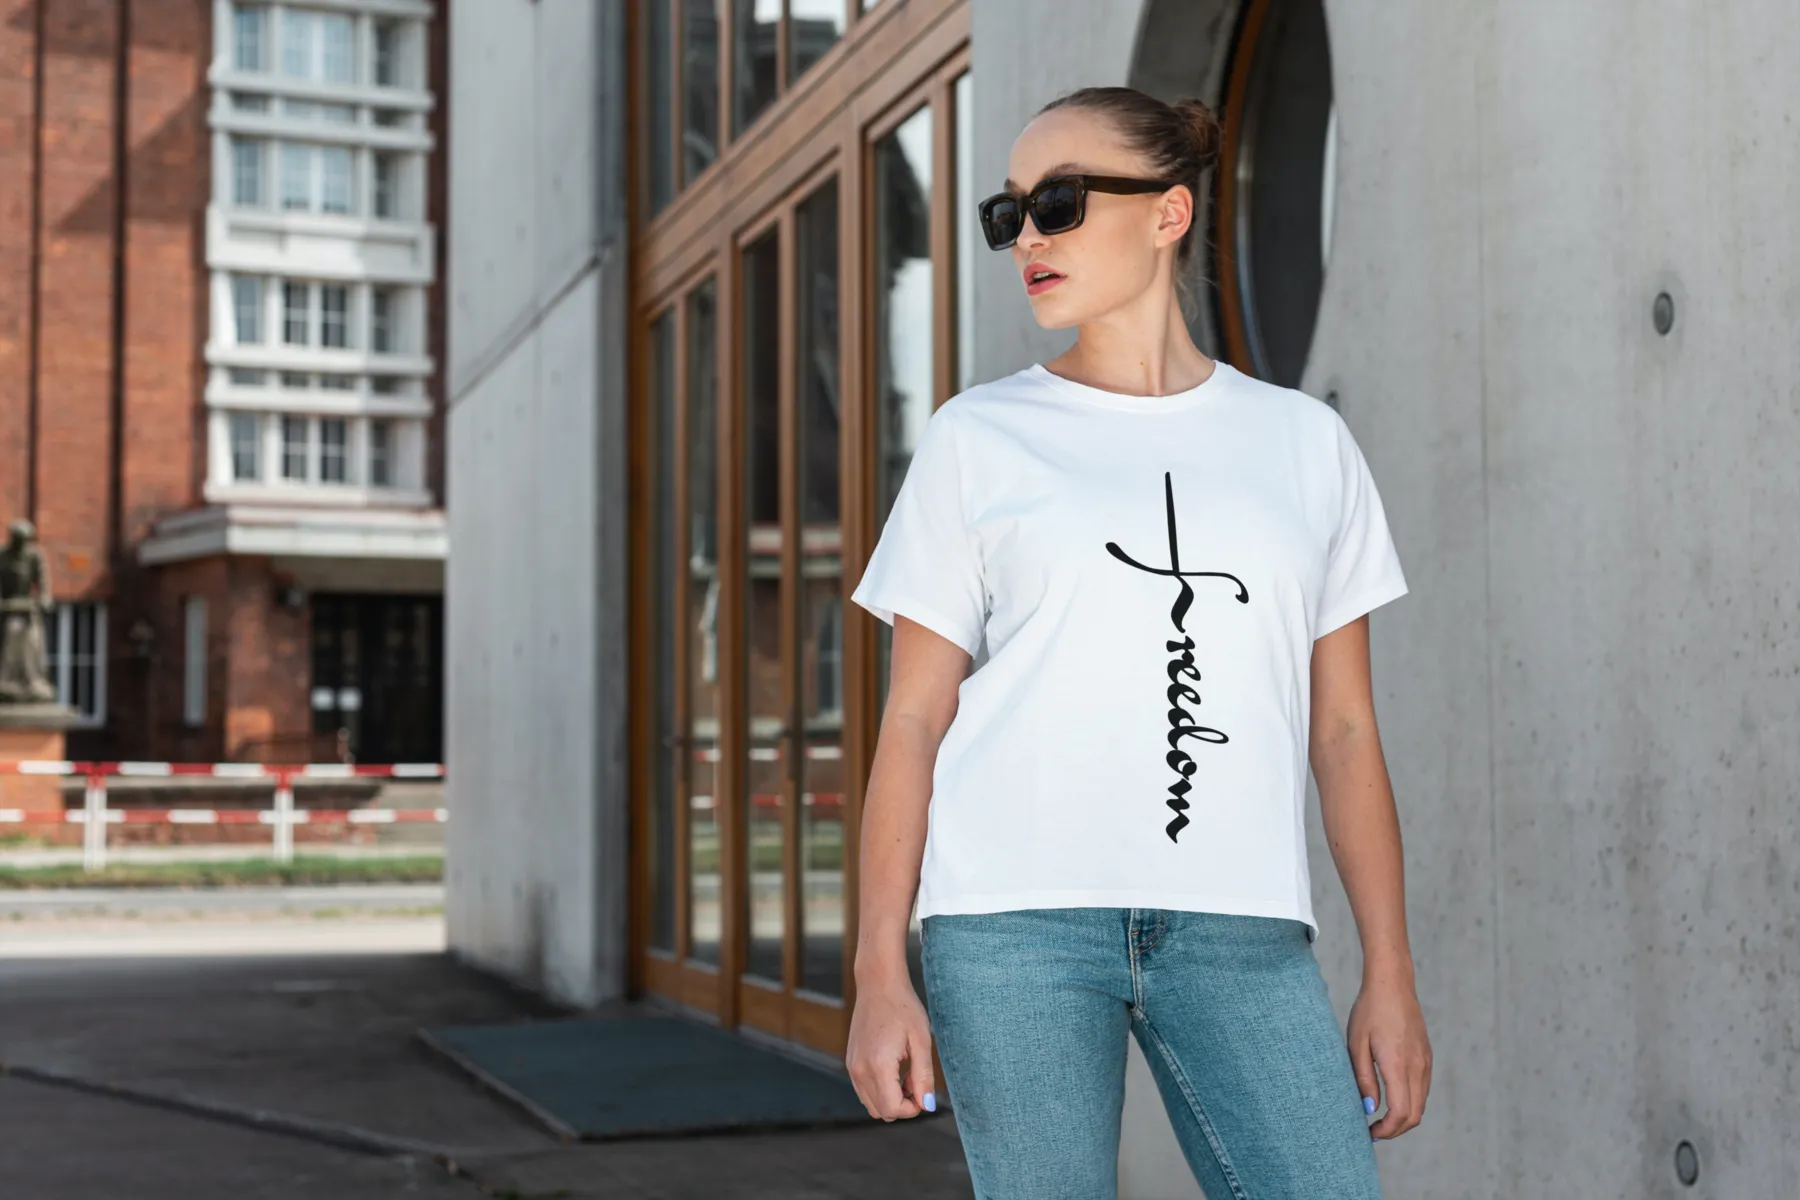 'Freedom in the Cross' t-shirt